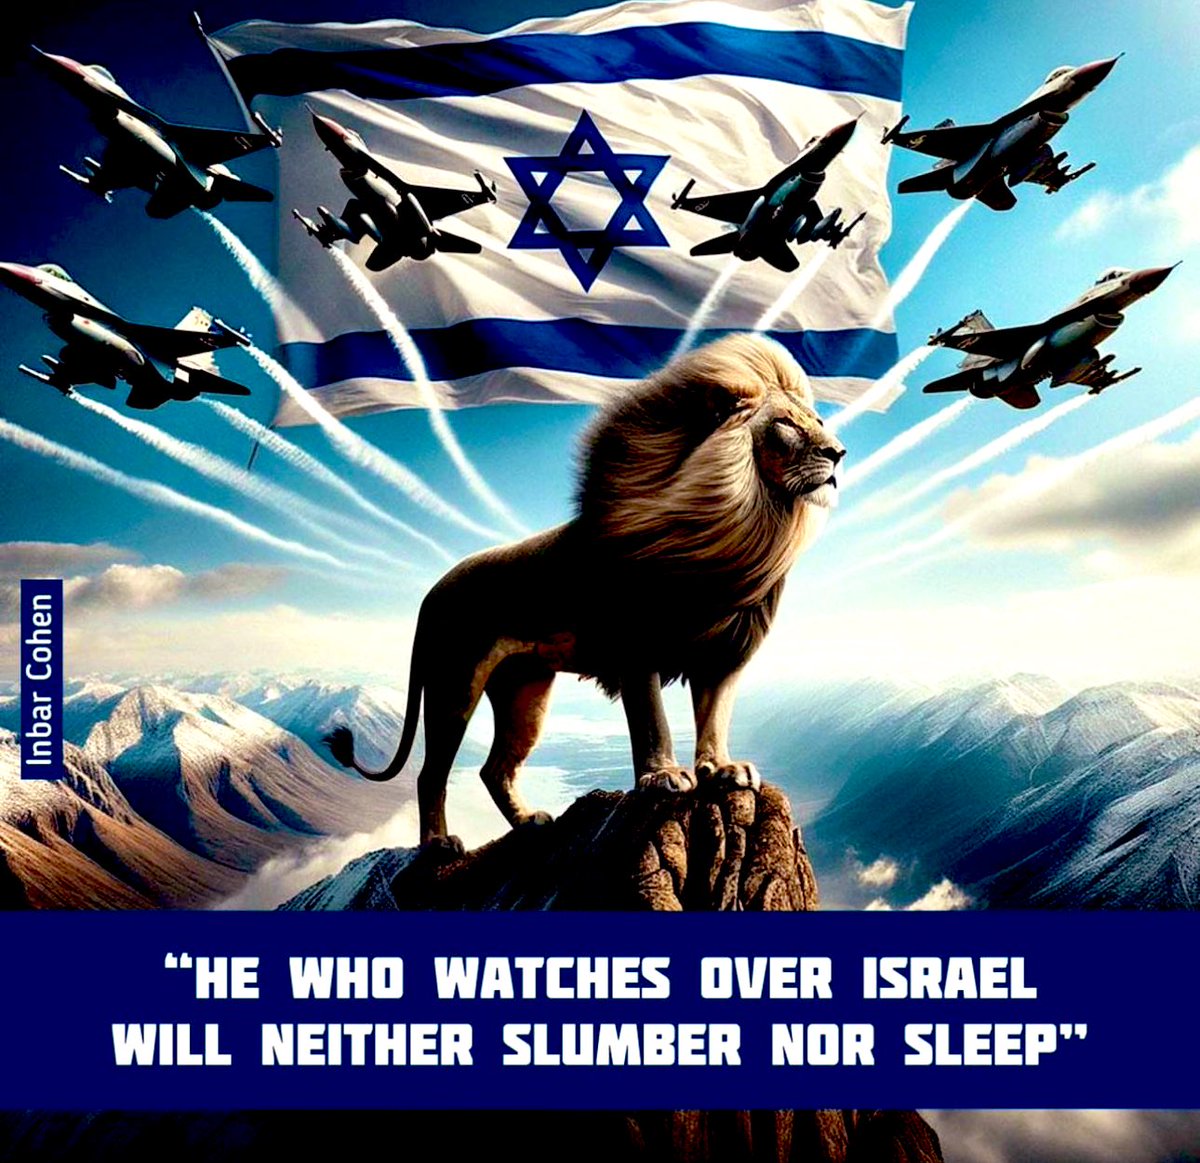 Psalm 121:3-4 The Lord does not slumber, so He is ALWAYS awake to keep watch over Israel. This is a military image of a guard vigilant and ever watchful, never sleeping, on duty. God is aware of every threat Israel faces and He is committed to protect them in the end.